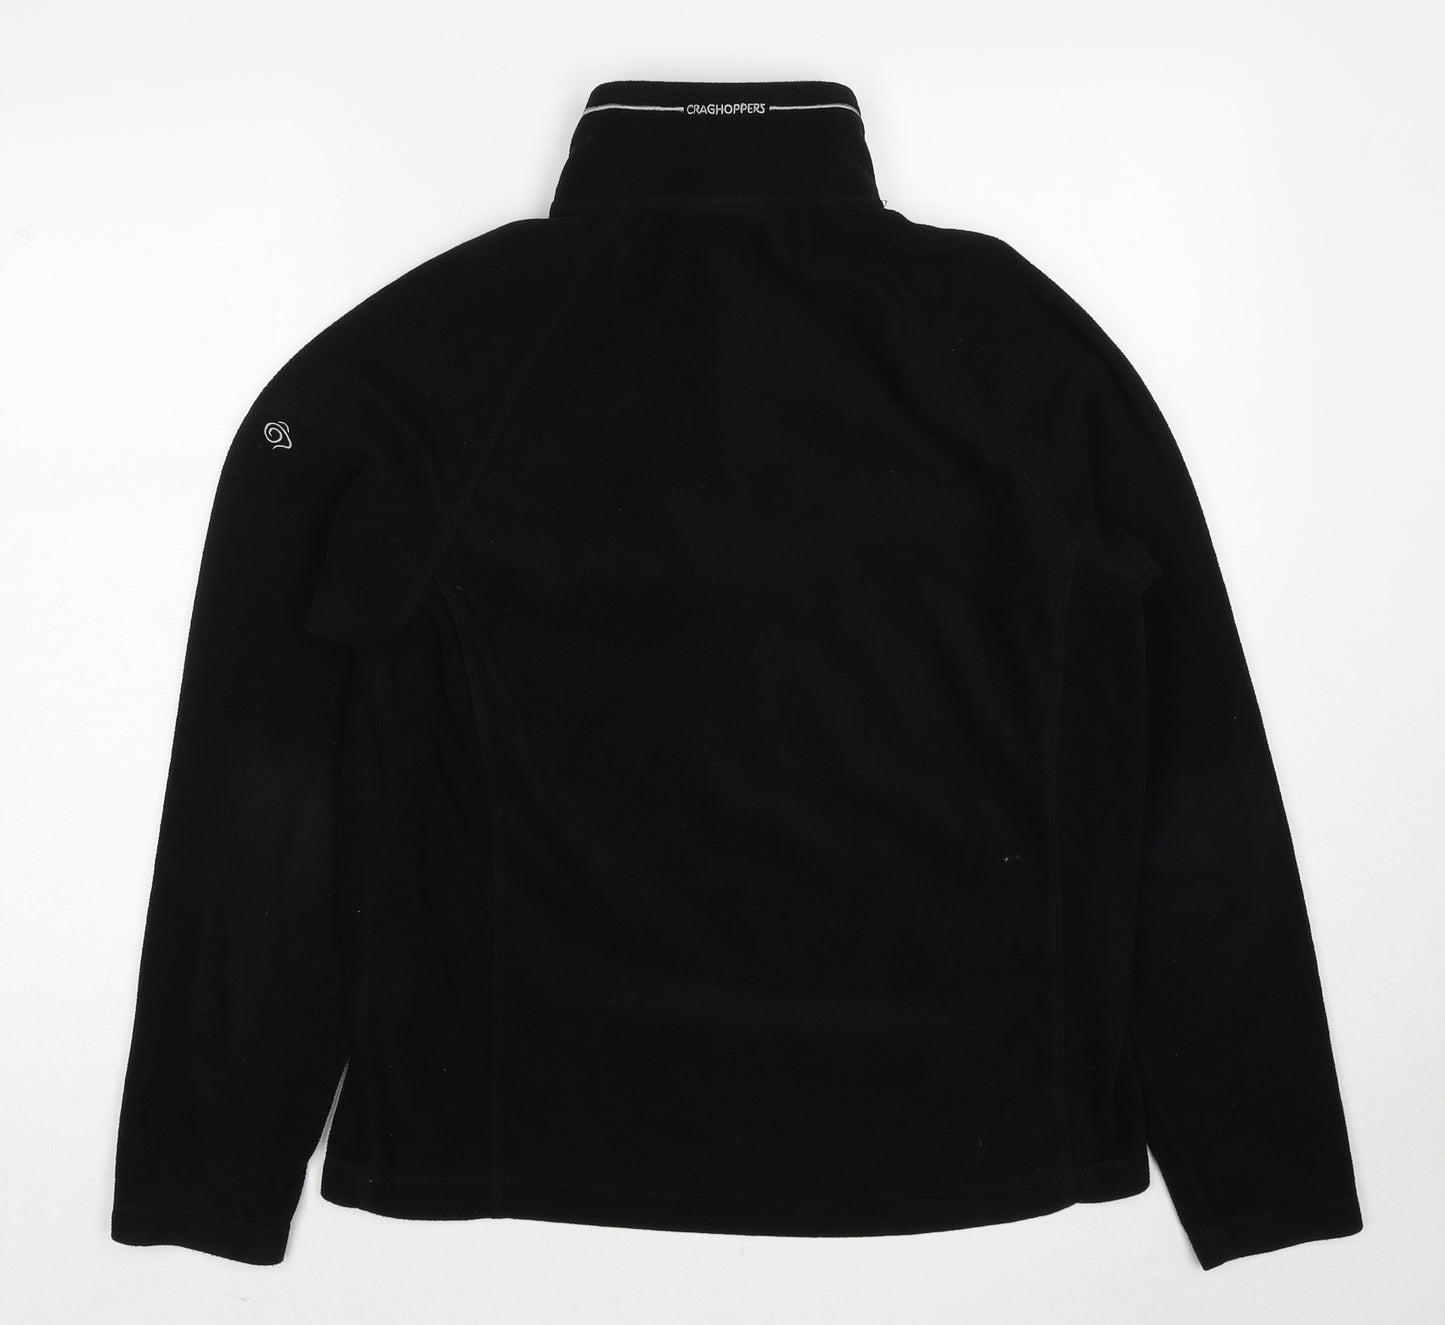 Craghoppers Mens Black Polyester Pullover Sweatshirt Size S